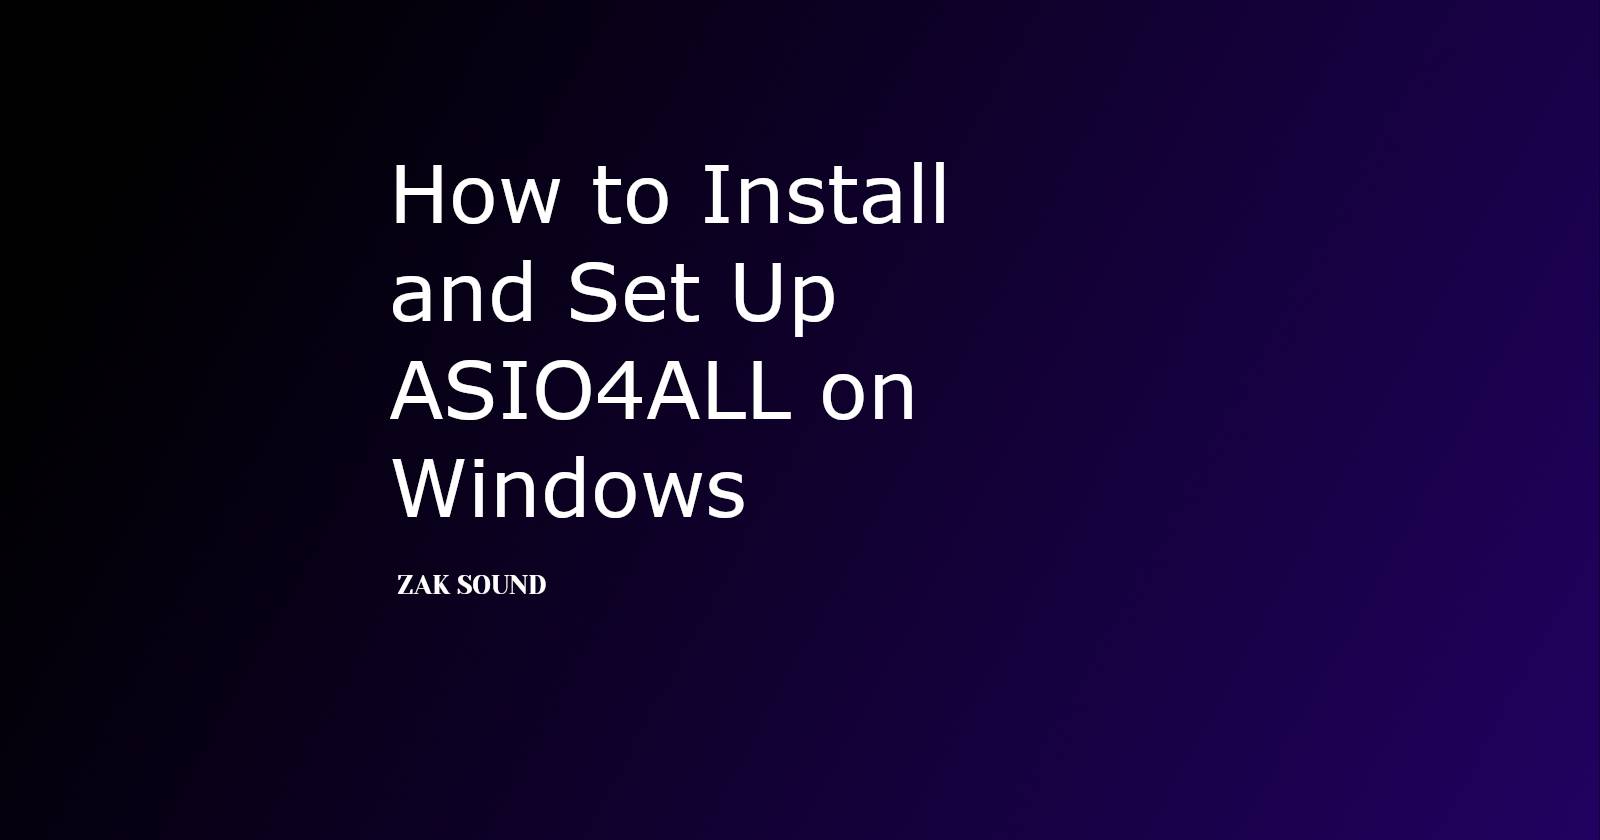 How to Install and Set Up ASIO4ALL on Windows - ZAK Sound